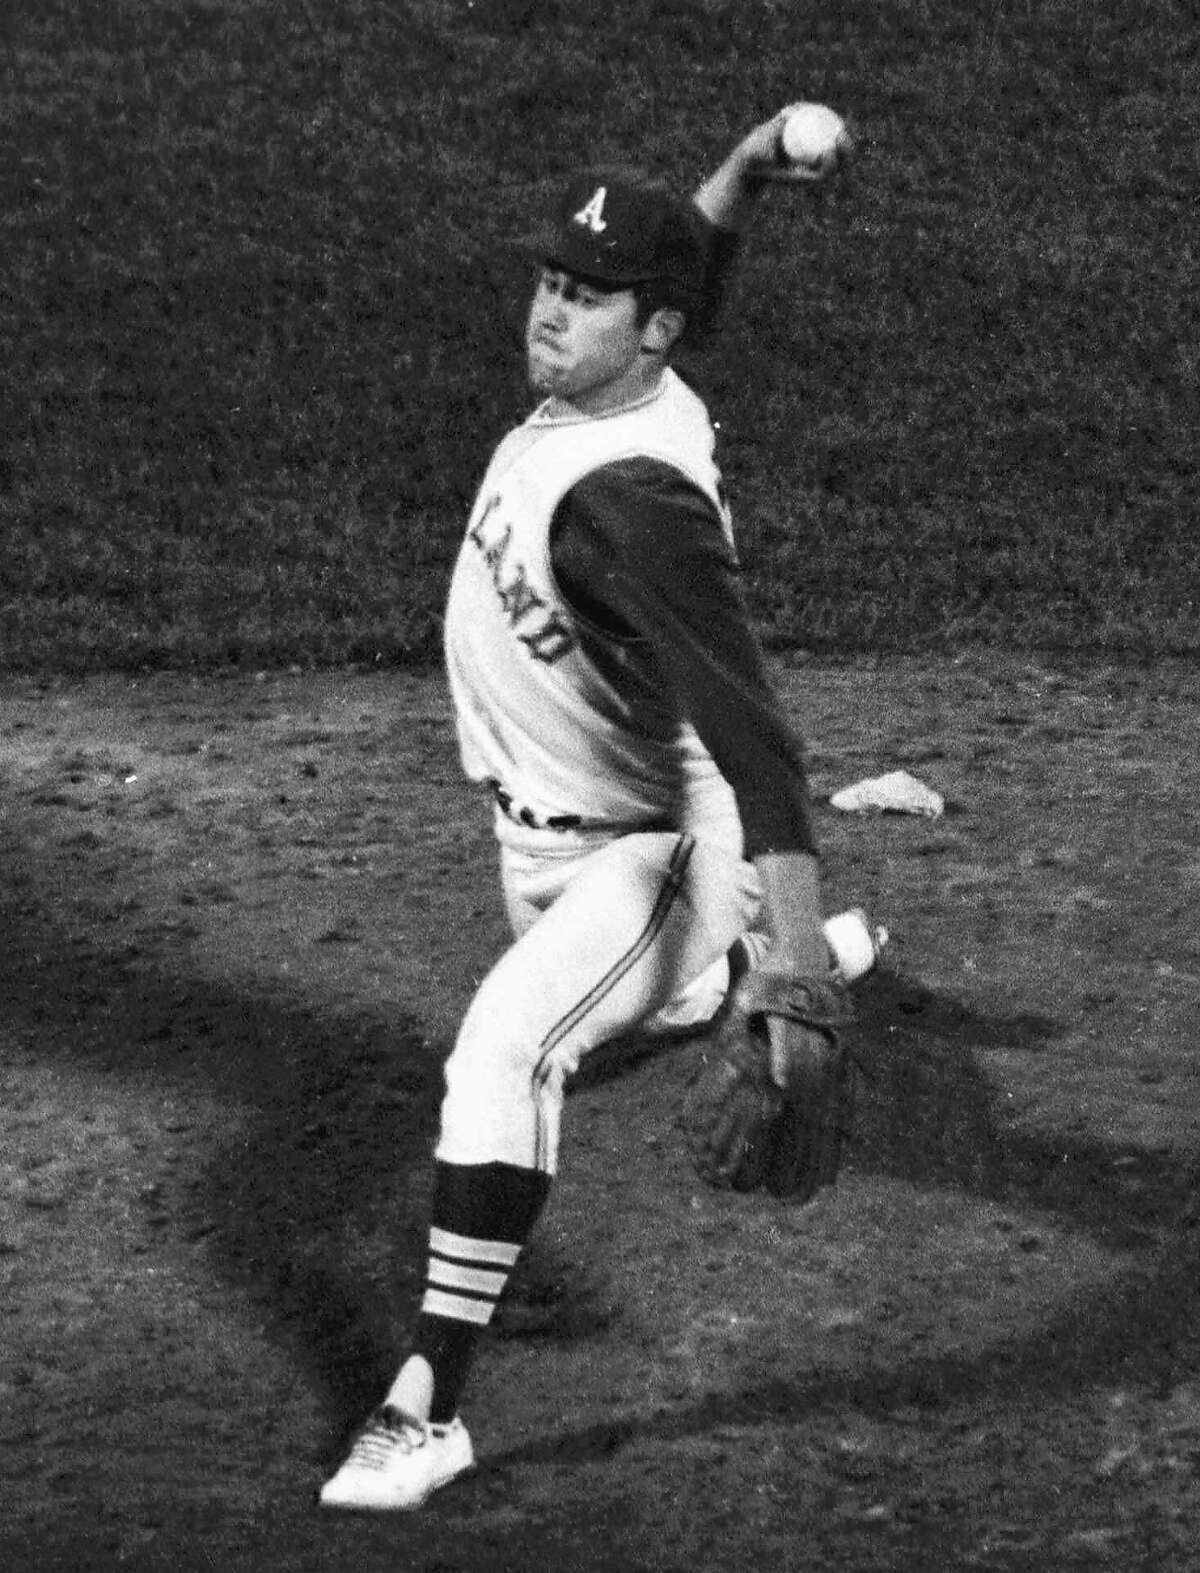 FILE--Jim "Catfish" Hunter bears down as he pitches to the last batter, Rich Resse of the Minnesota Twins, on his way to pitching a perfect game in this May 8, 1968 photo, in Oakland, Calif. Hunter, the Hall of Fame pitcher who ushered in baseball's era of big bucks for free agents, died today at age 53 after battling the disease named after another New York Yankees great, Lou Gehrig..(AP